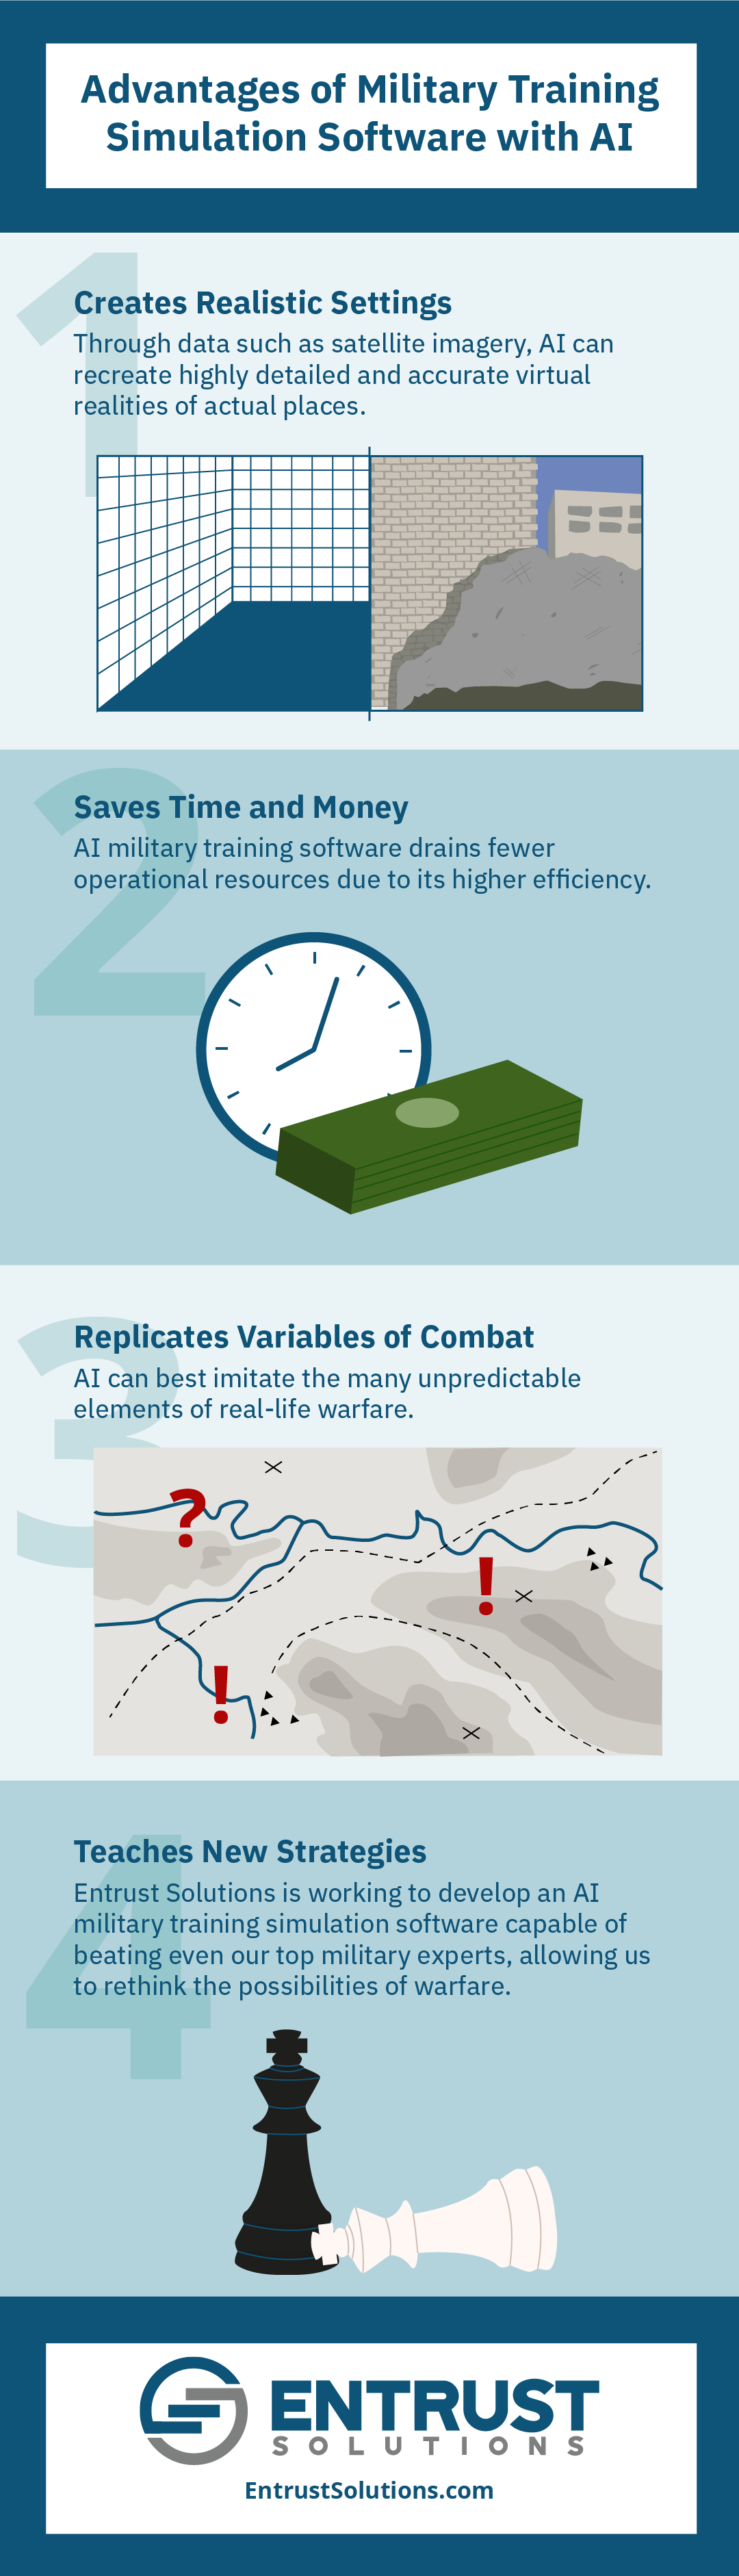 An infographic sharing our 4 advantages of military training simulation software with AI discussed in this post.